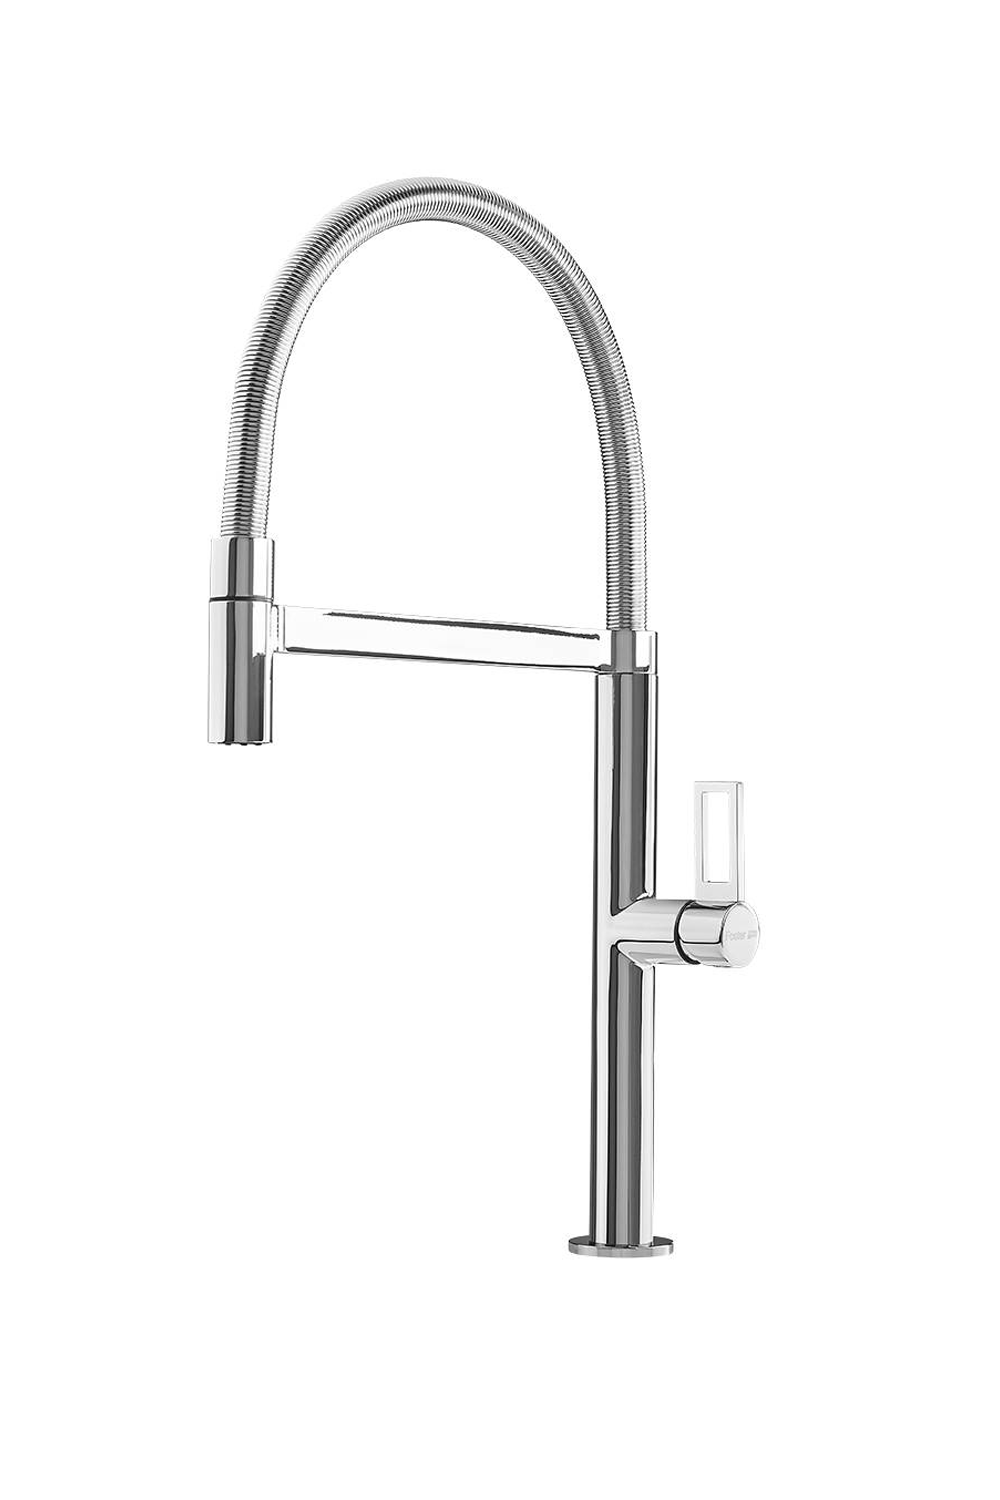 FOSTER PLAY Single lever faucet with rotating barrel and flexible head | Made in Italy |